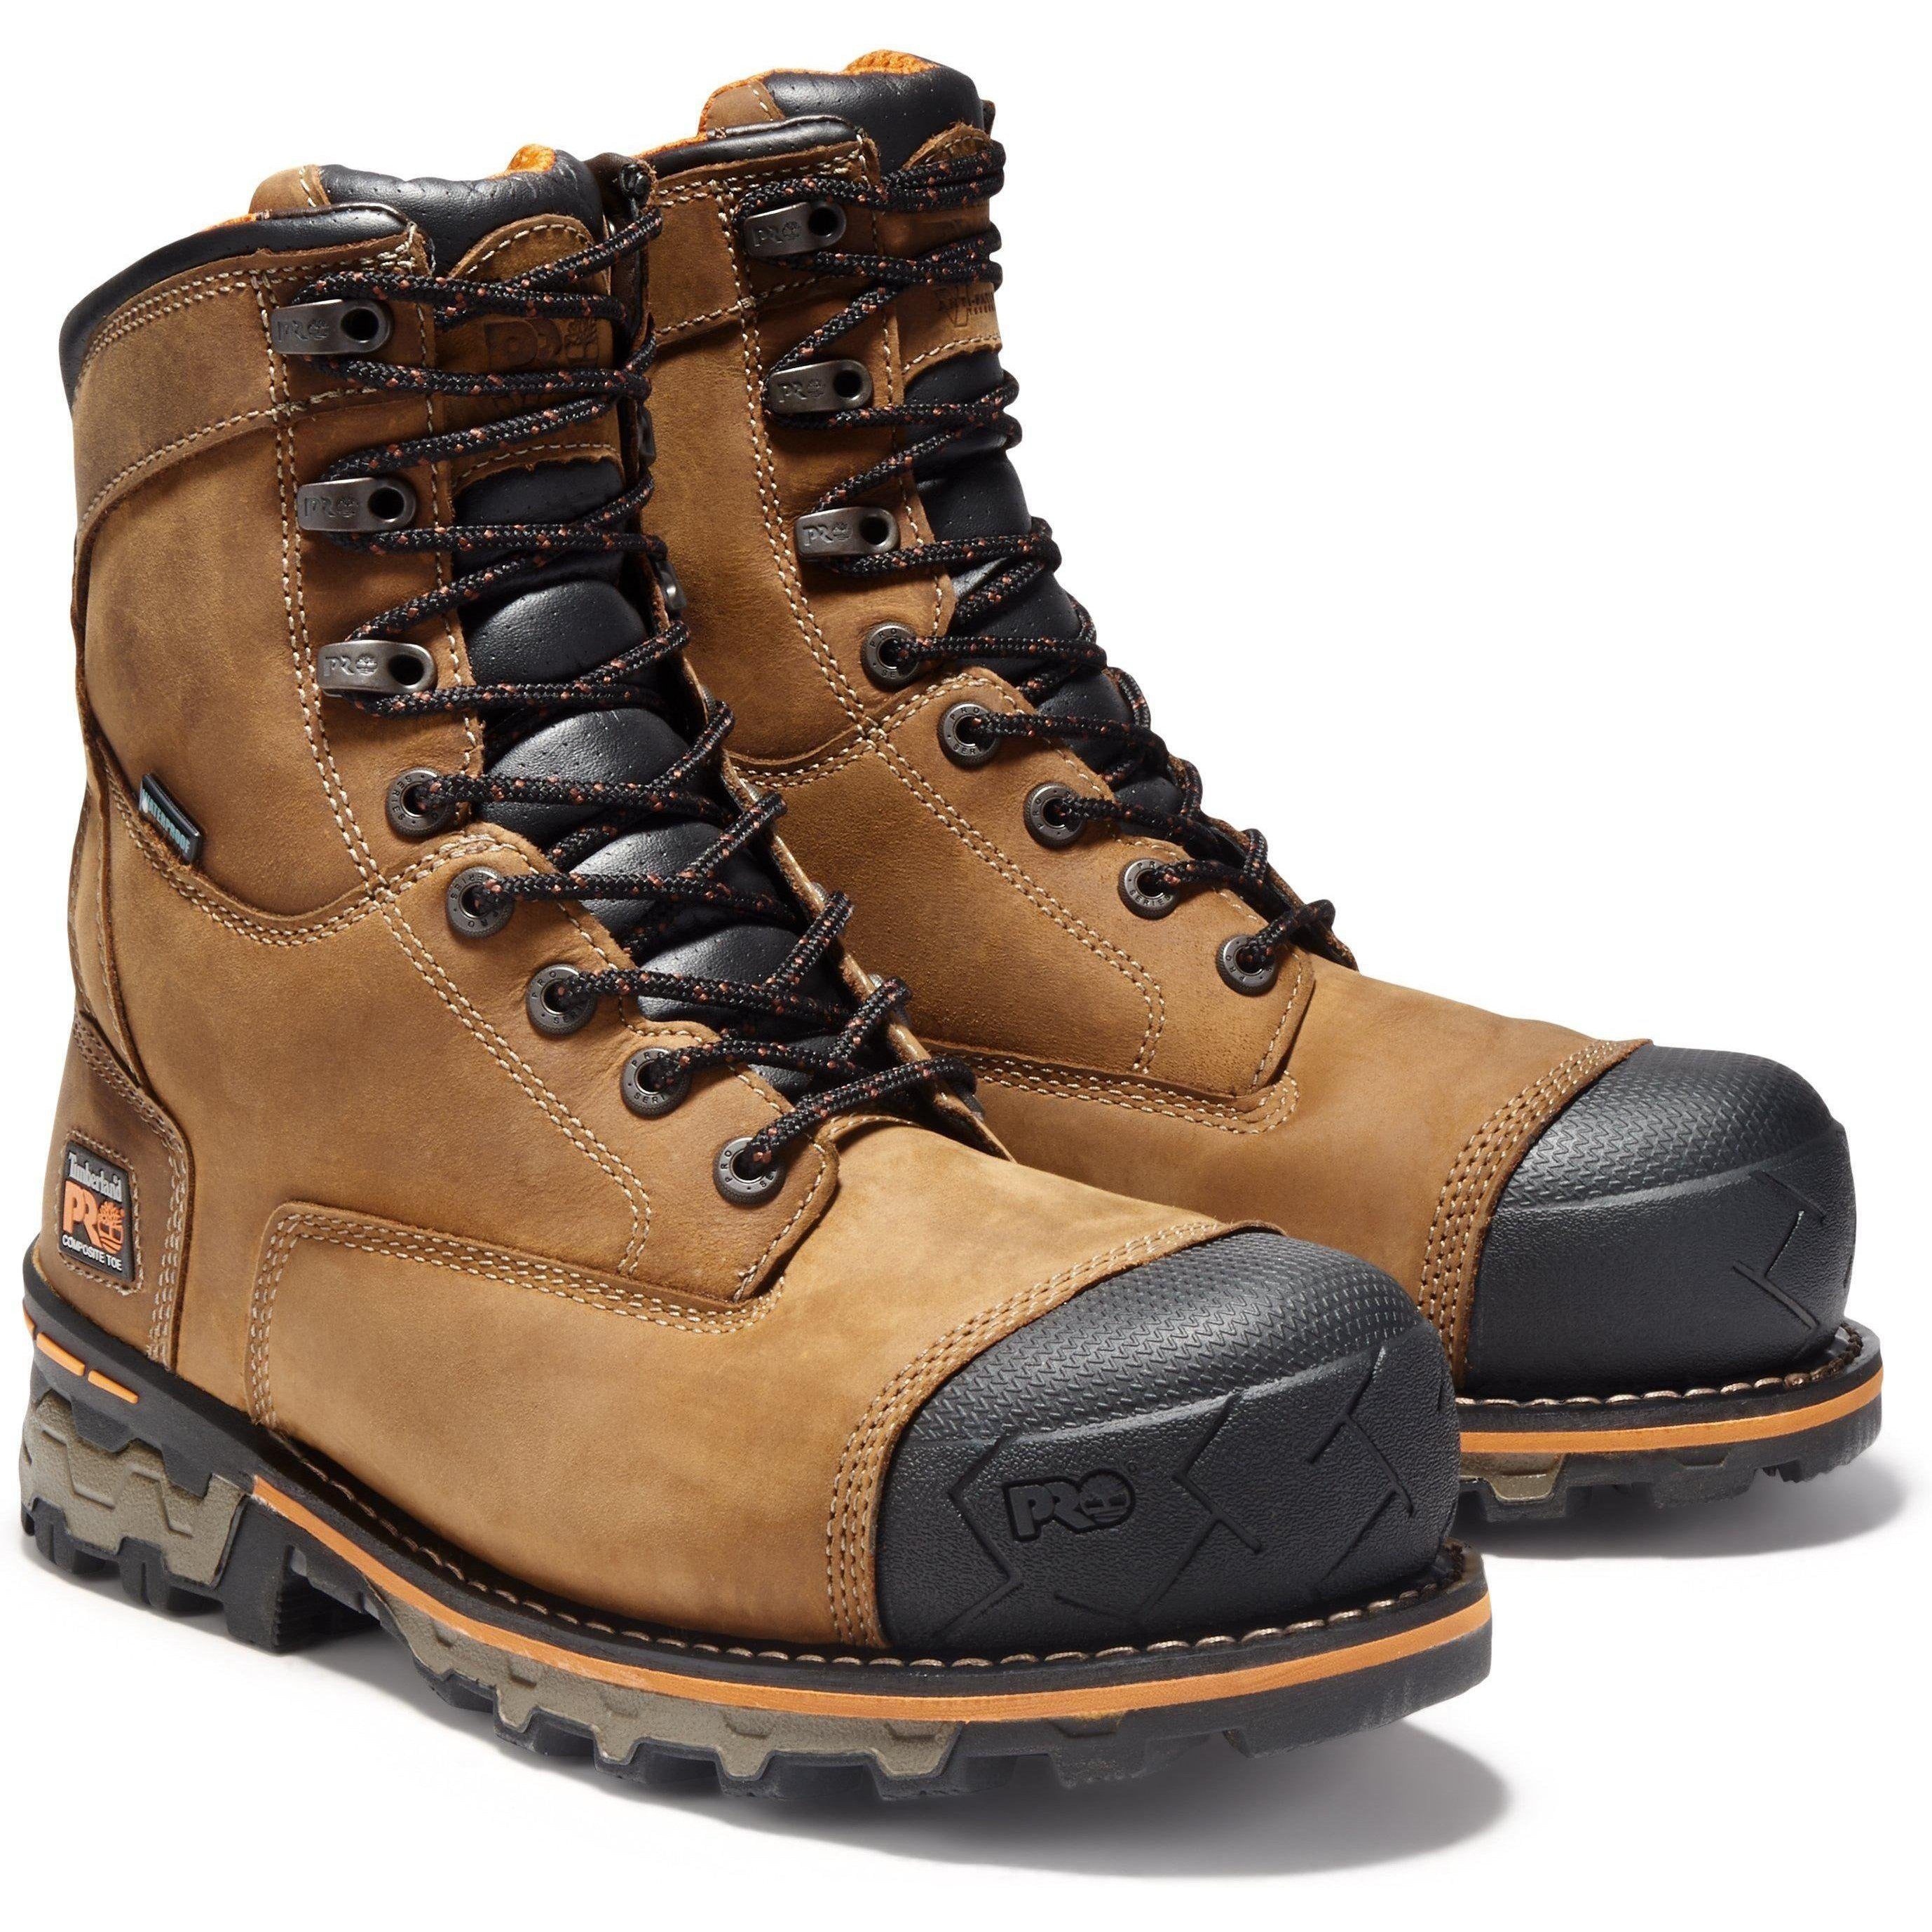 Timberland PRO Men's Boondock 8" Comp Toe WP Work Boot - TB092671214 7 / Medium / Brown Oiled Distressed - Overlook Boots